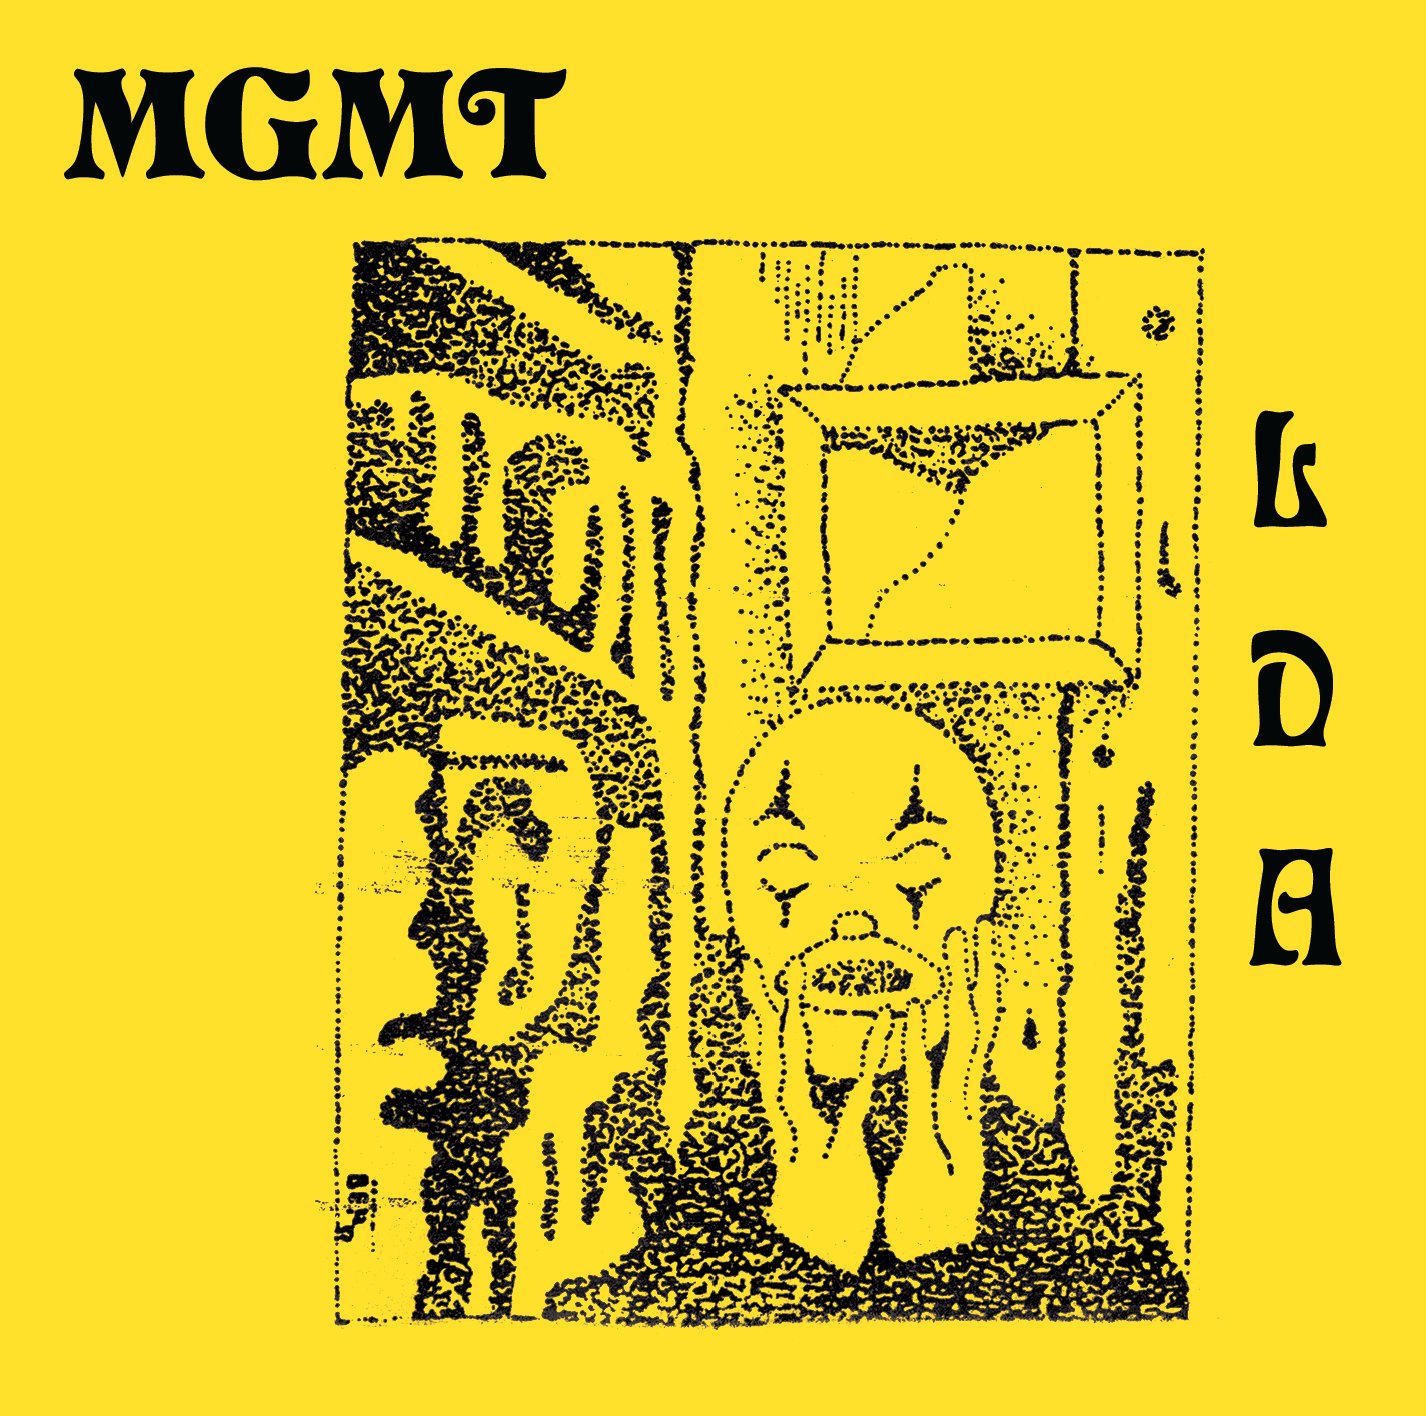 Little Dark Age album cover. Photo by: MGMT